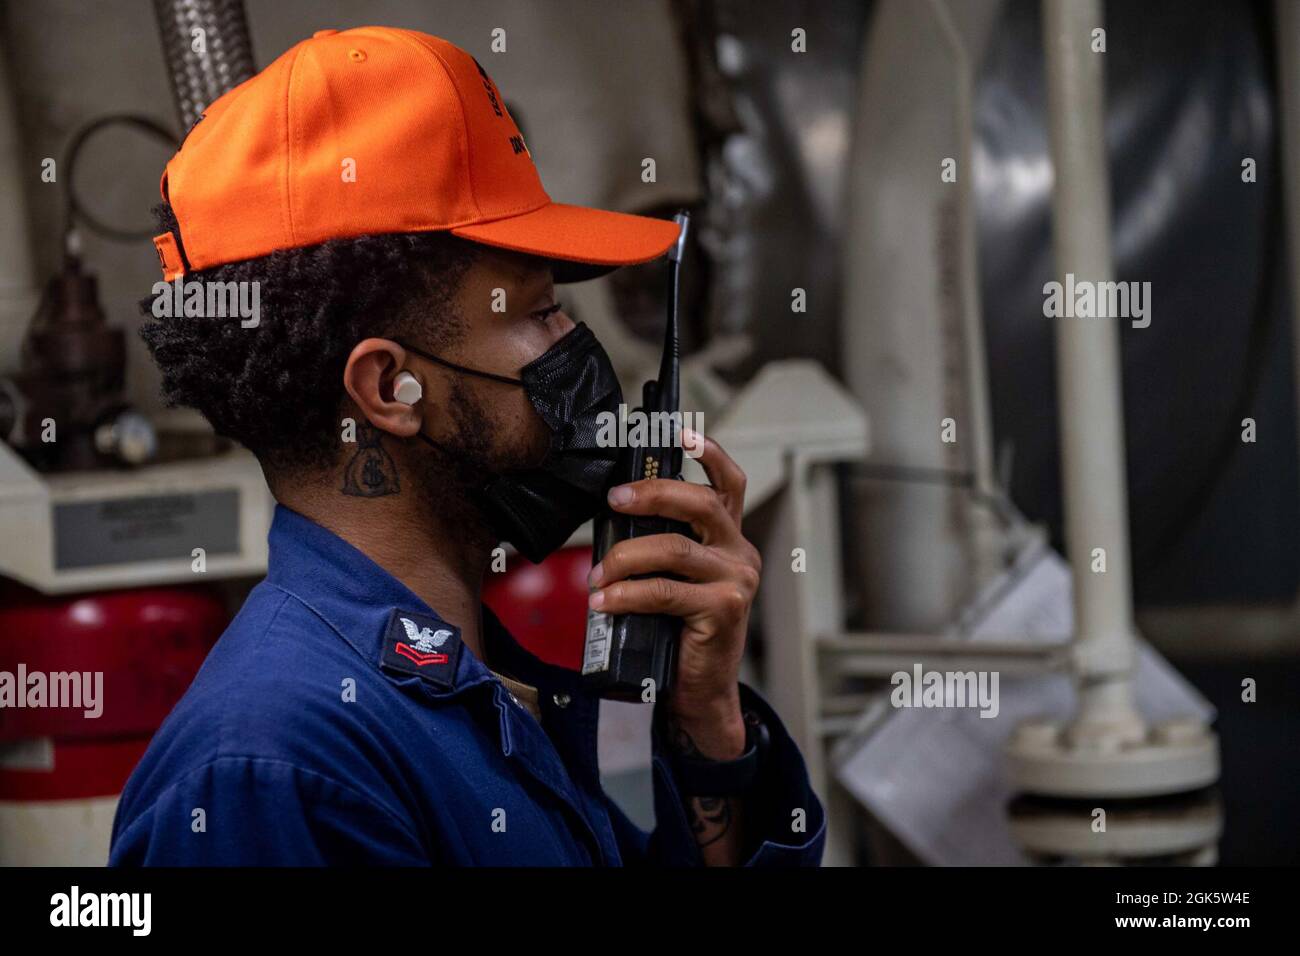 210810-N-LP924-1049 PACIFIC OCEAN (Aug. 10, 2021) Gas Turbine Systems Technician (Mechanical) 2nd class Quentin Brittian, a native of Atlanta, uses a radio to communicate during a training event aboard Arleigh Burke-class destroyer USS Michael Murphy (DDG 112), Aug. 10, 2021. Murphy is currently underway conducting routine operations in U.S. Third Fleet. Stock Photo